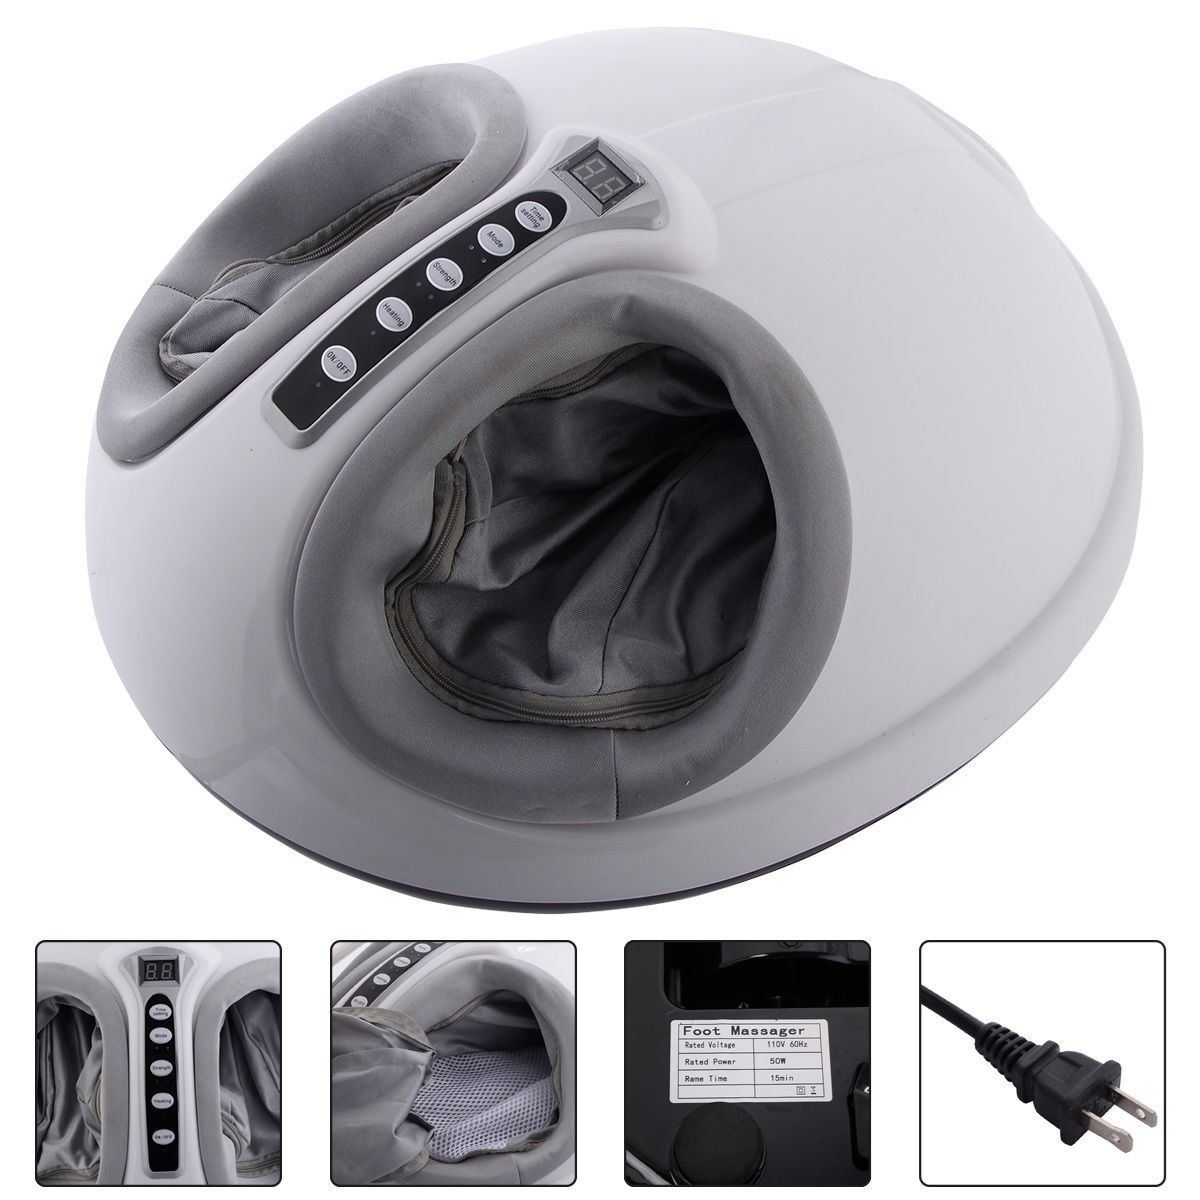 Online Gym Shop Cb17021 Foot Massager Shiatsu Heat Rolling Kneading With Led Display